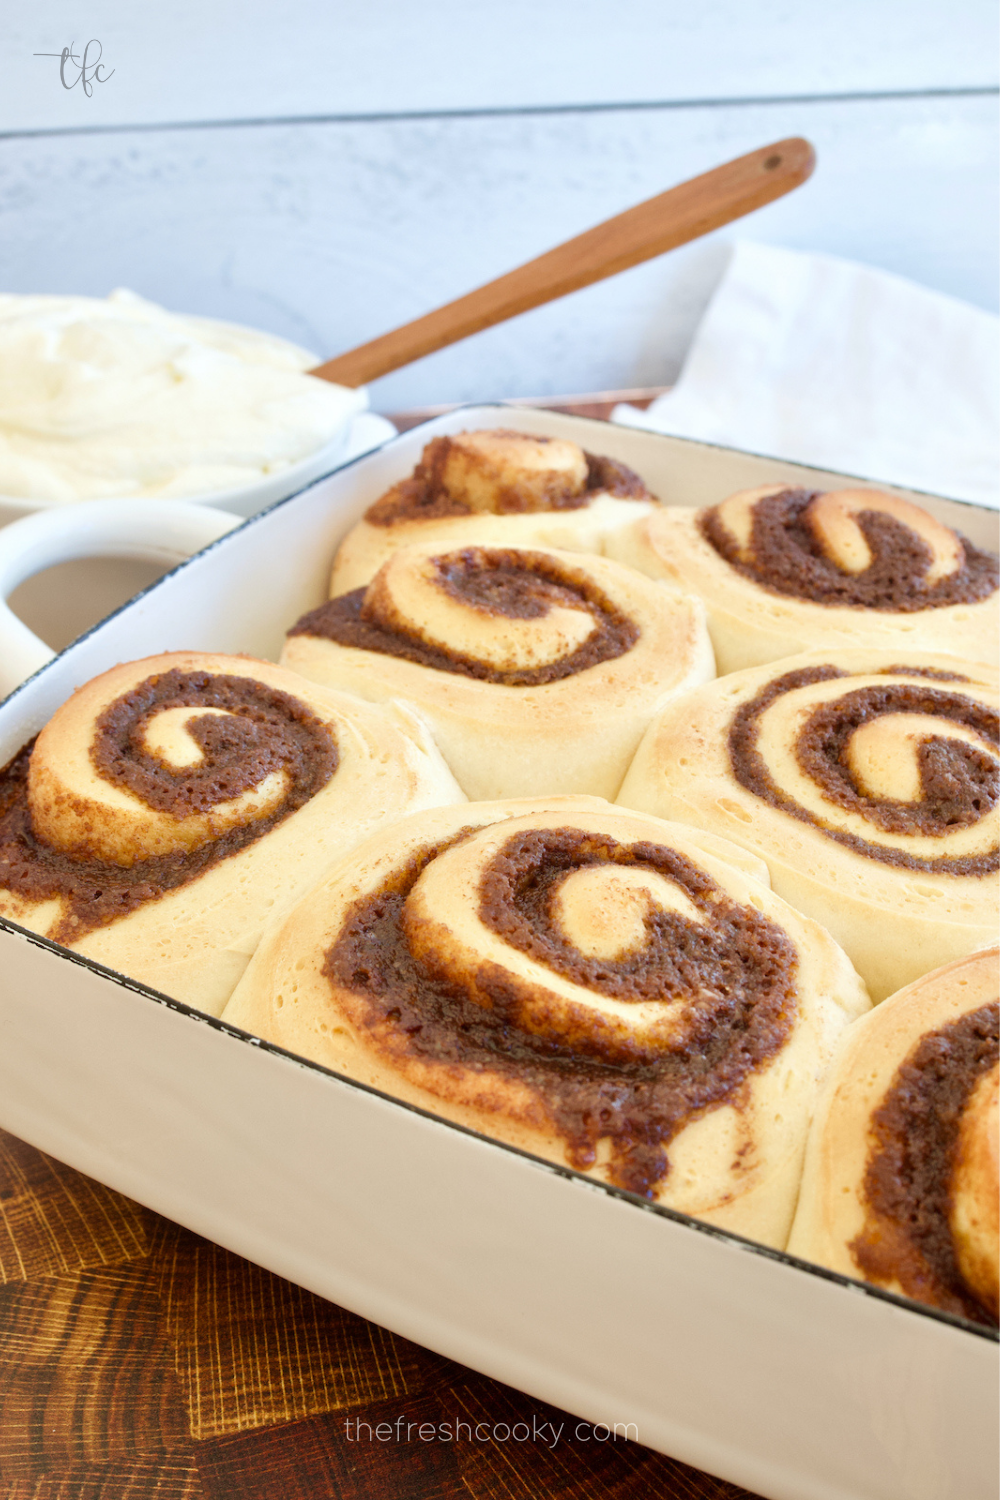 Pan of hot, soft cinnamon rolls with bowl of cream cheese frosting ready to be frosted.